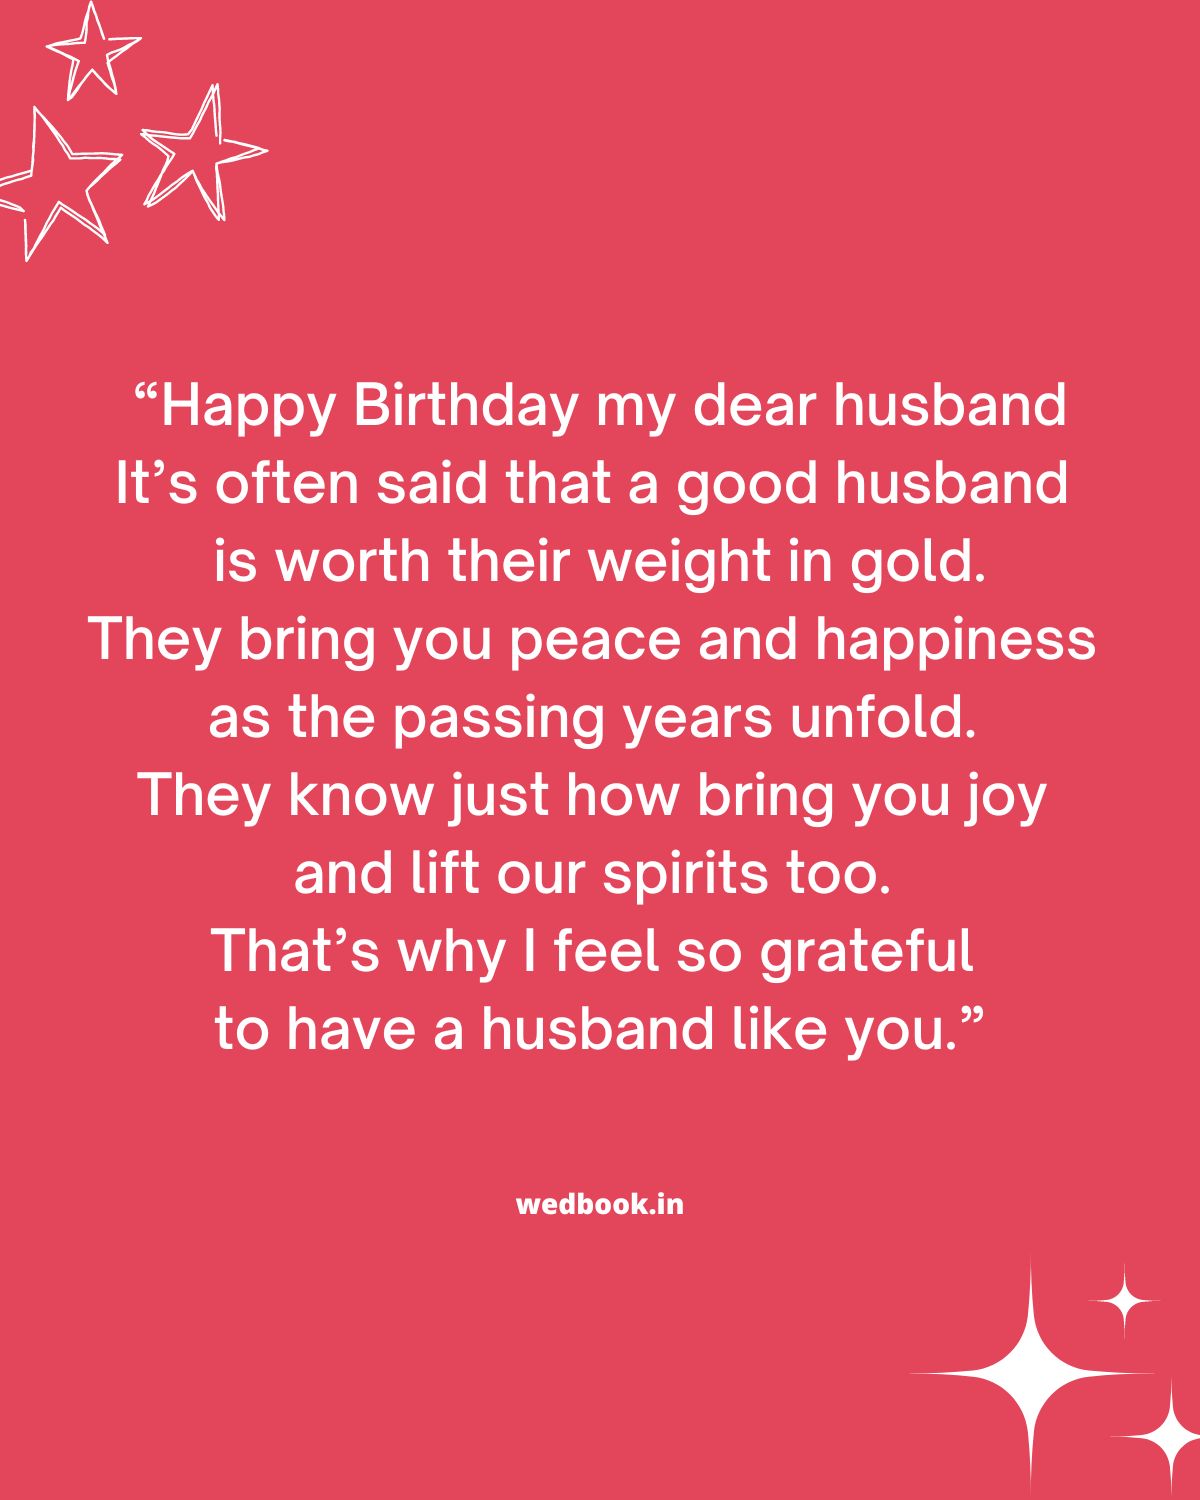 45 Happy Birthday Poems For Husband: Romantic, Heart-Touching, & Funny ...